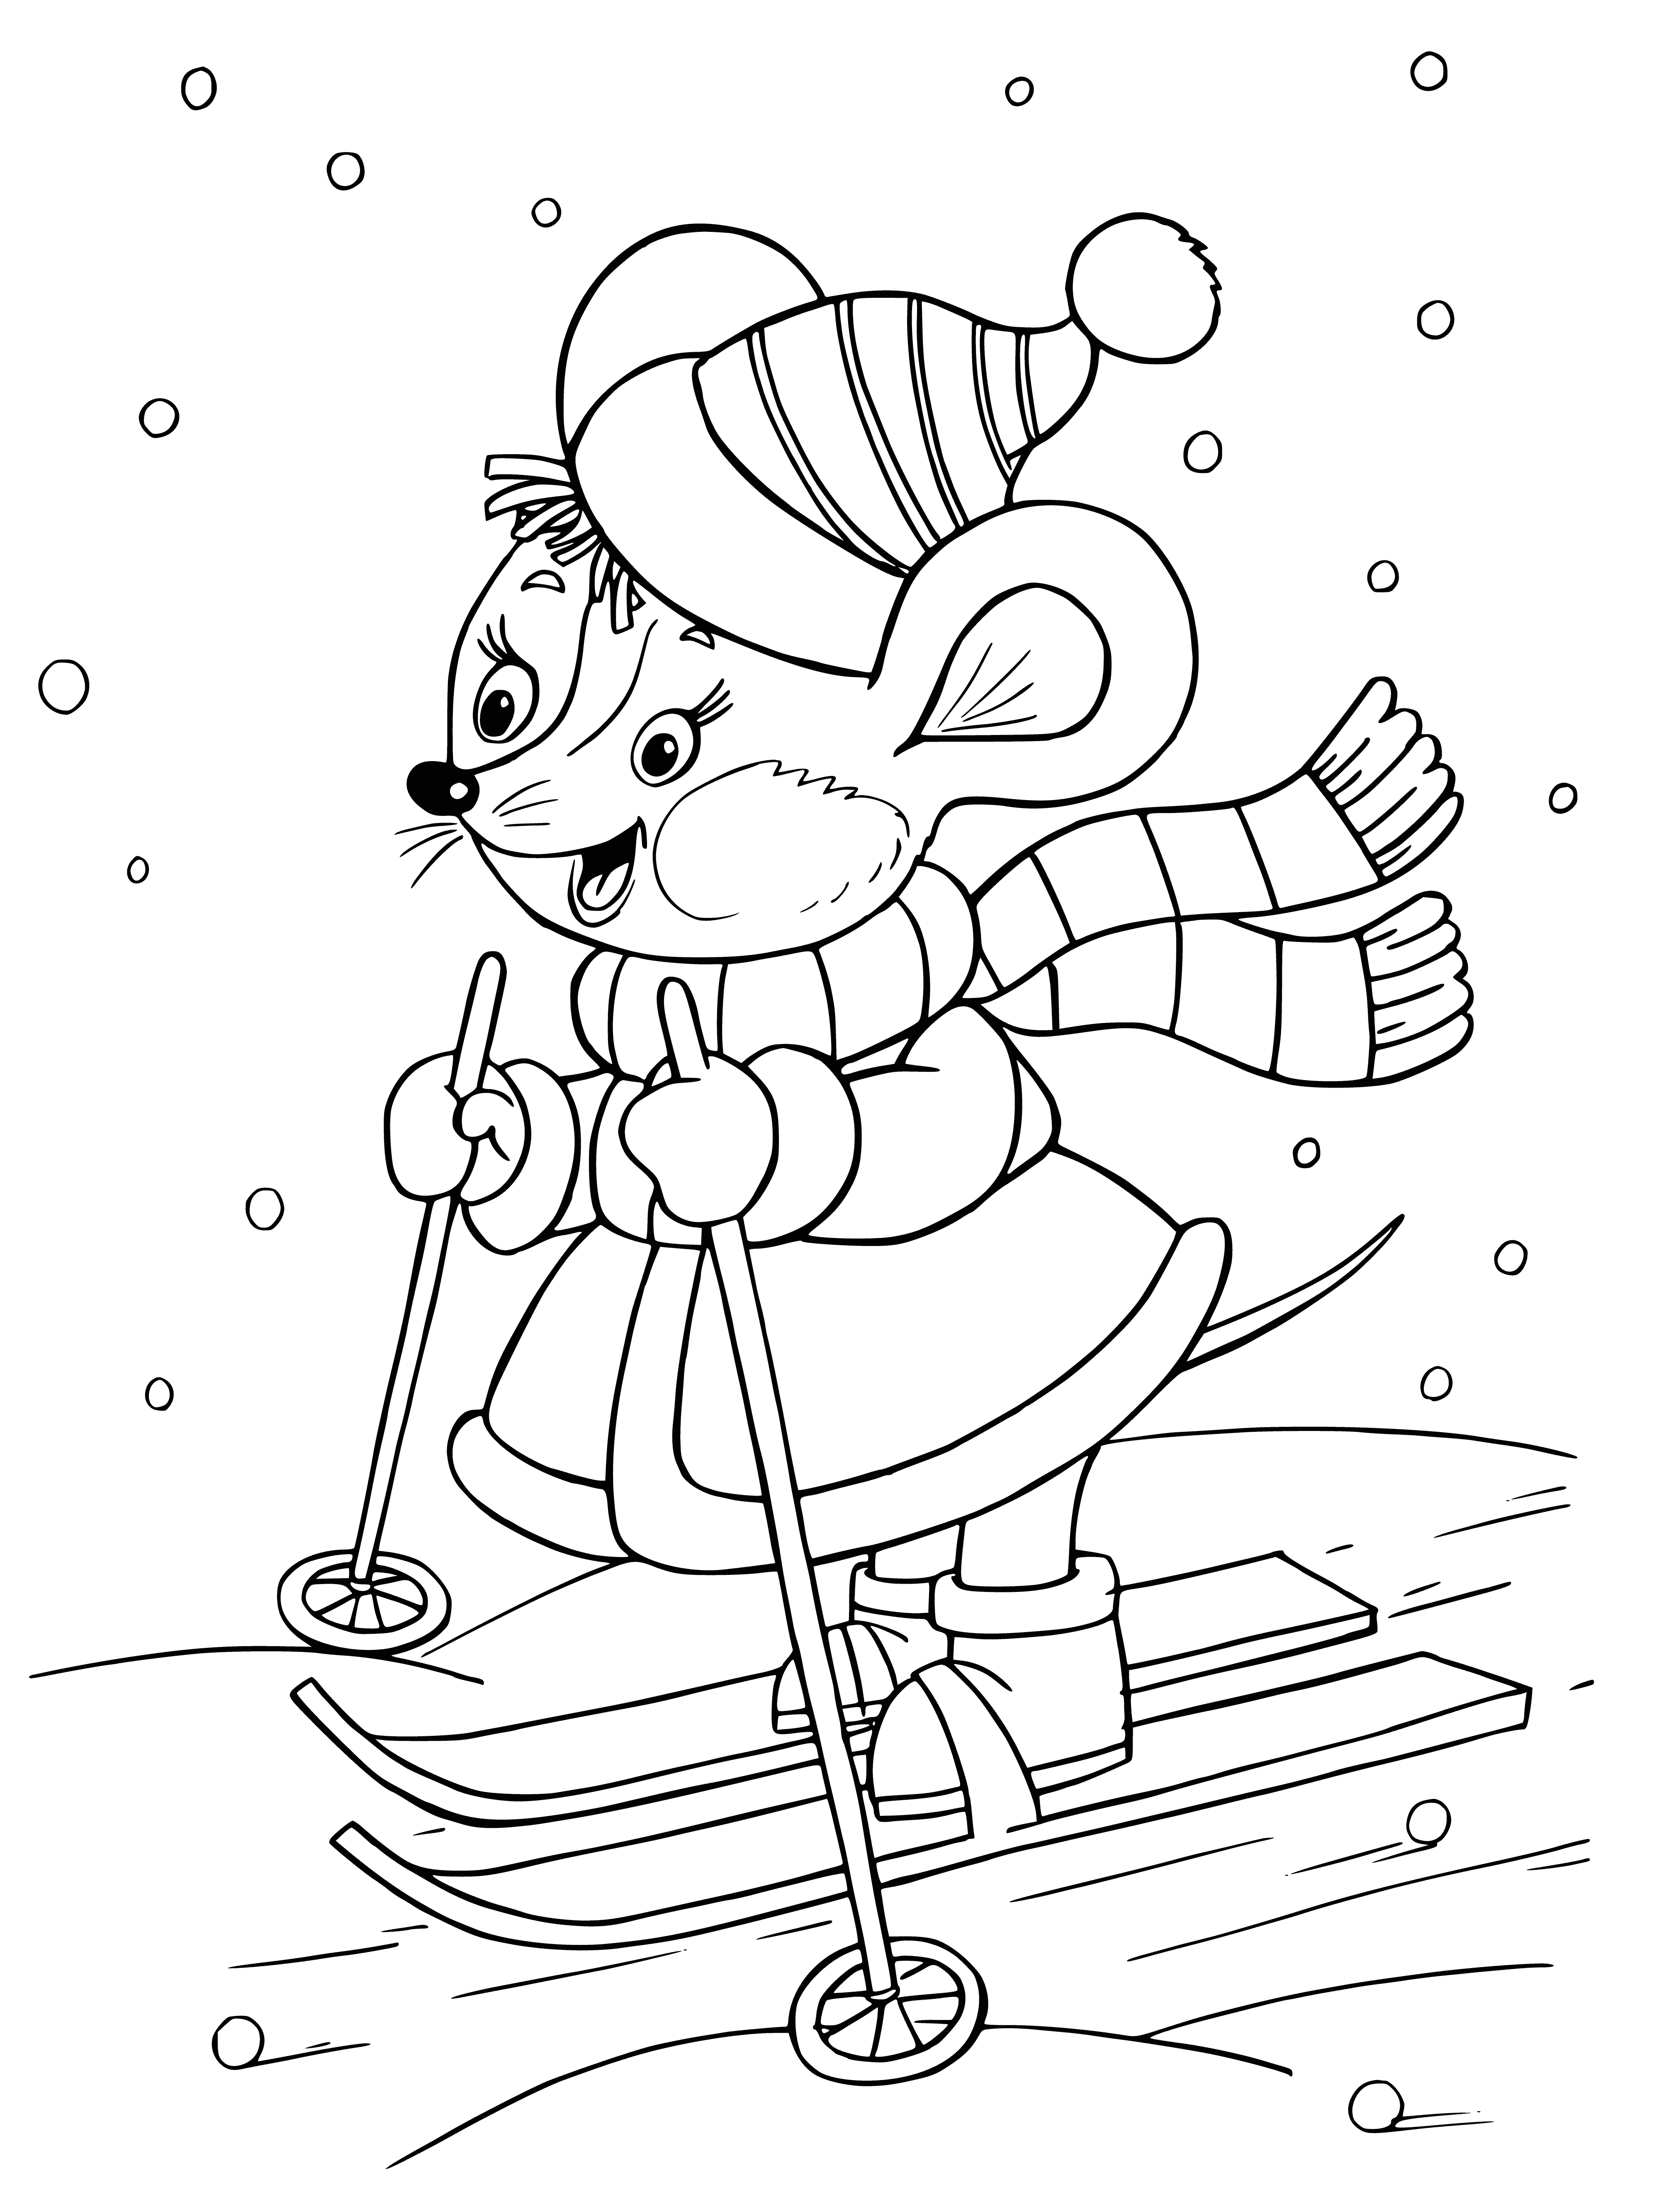 coloring page: Rat on skis in the middle, wearing red scarf+hat, two mice skiing with it: 1 white behind, 1 brown in front.